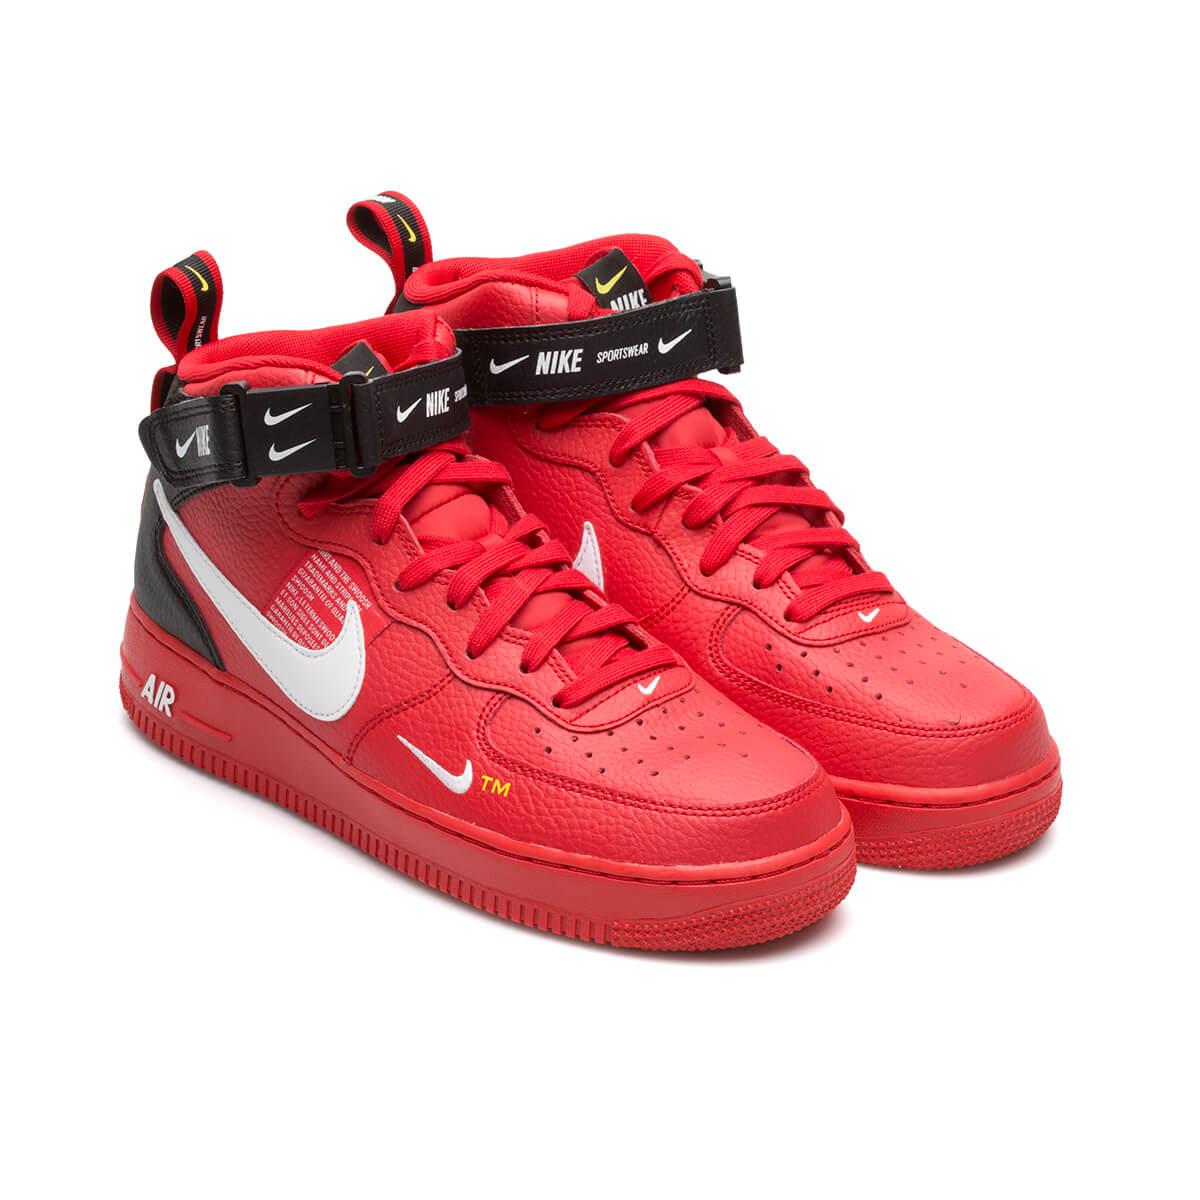 red nike air force 1 07 mid lv8